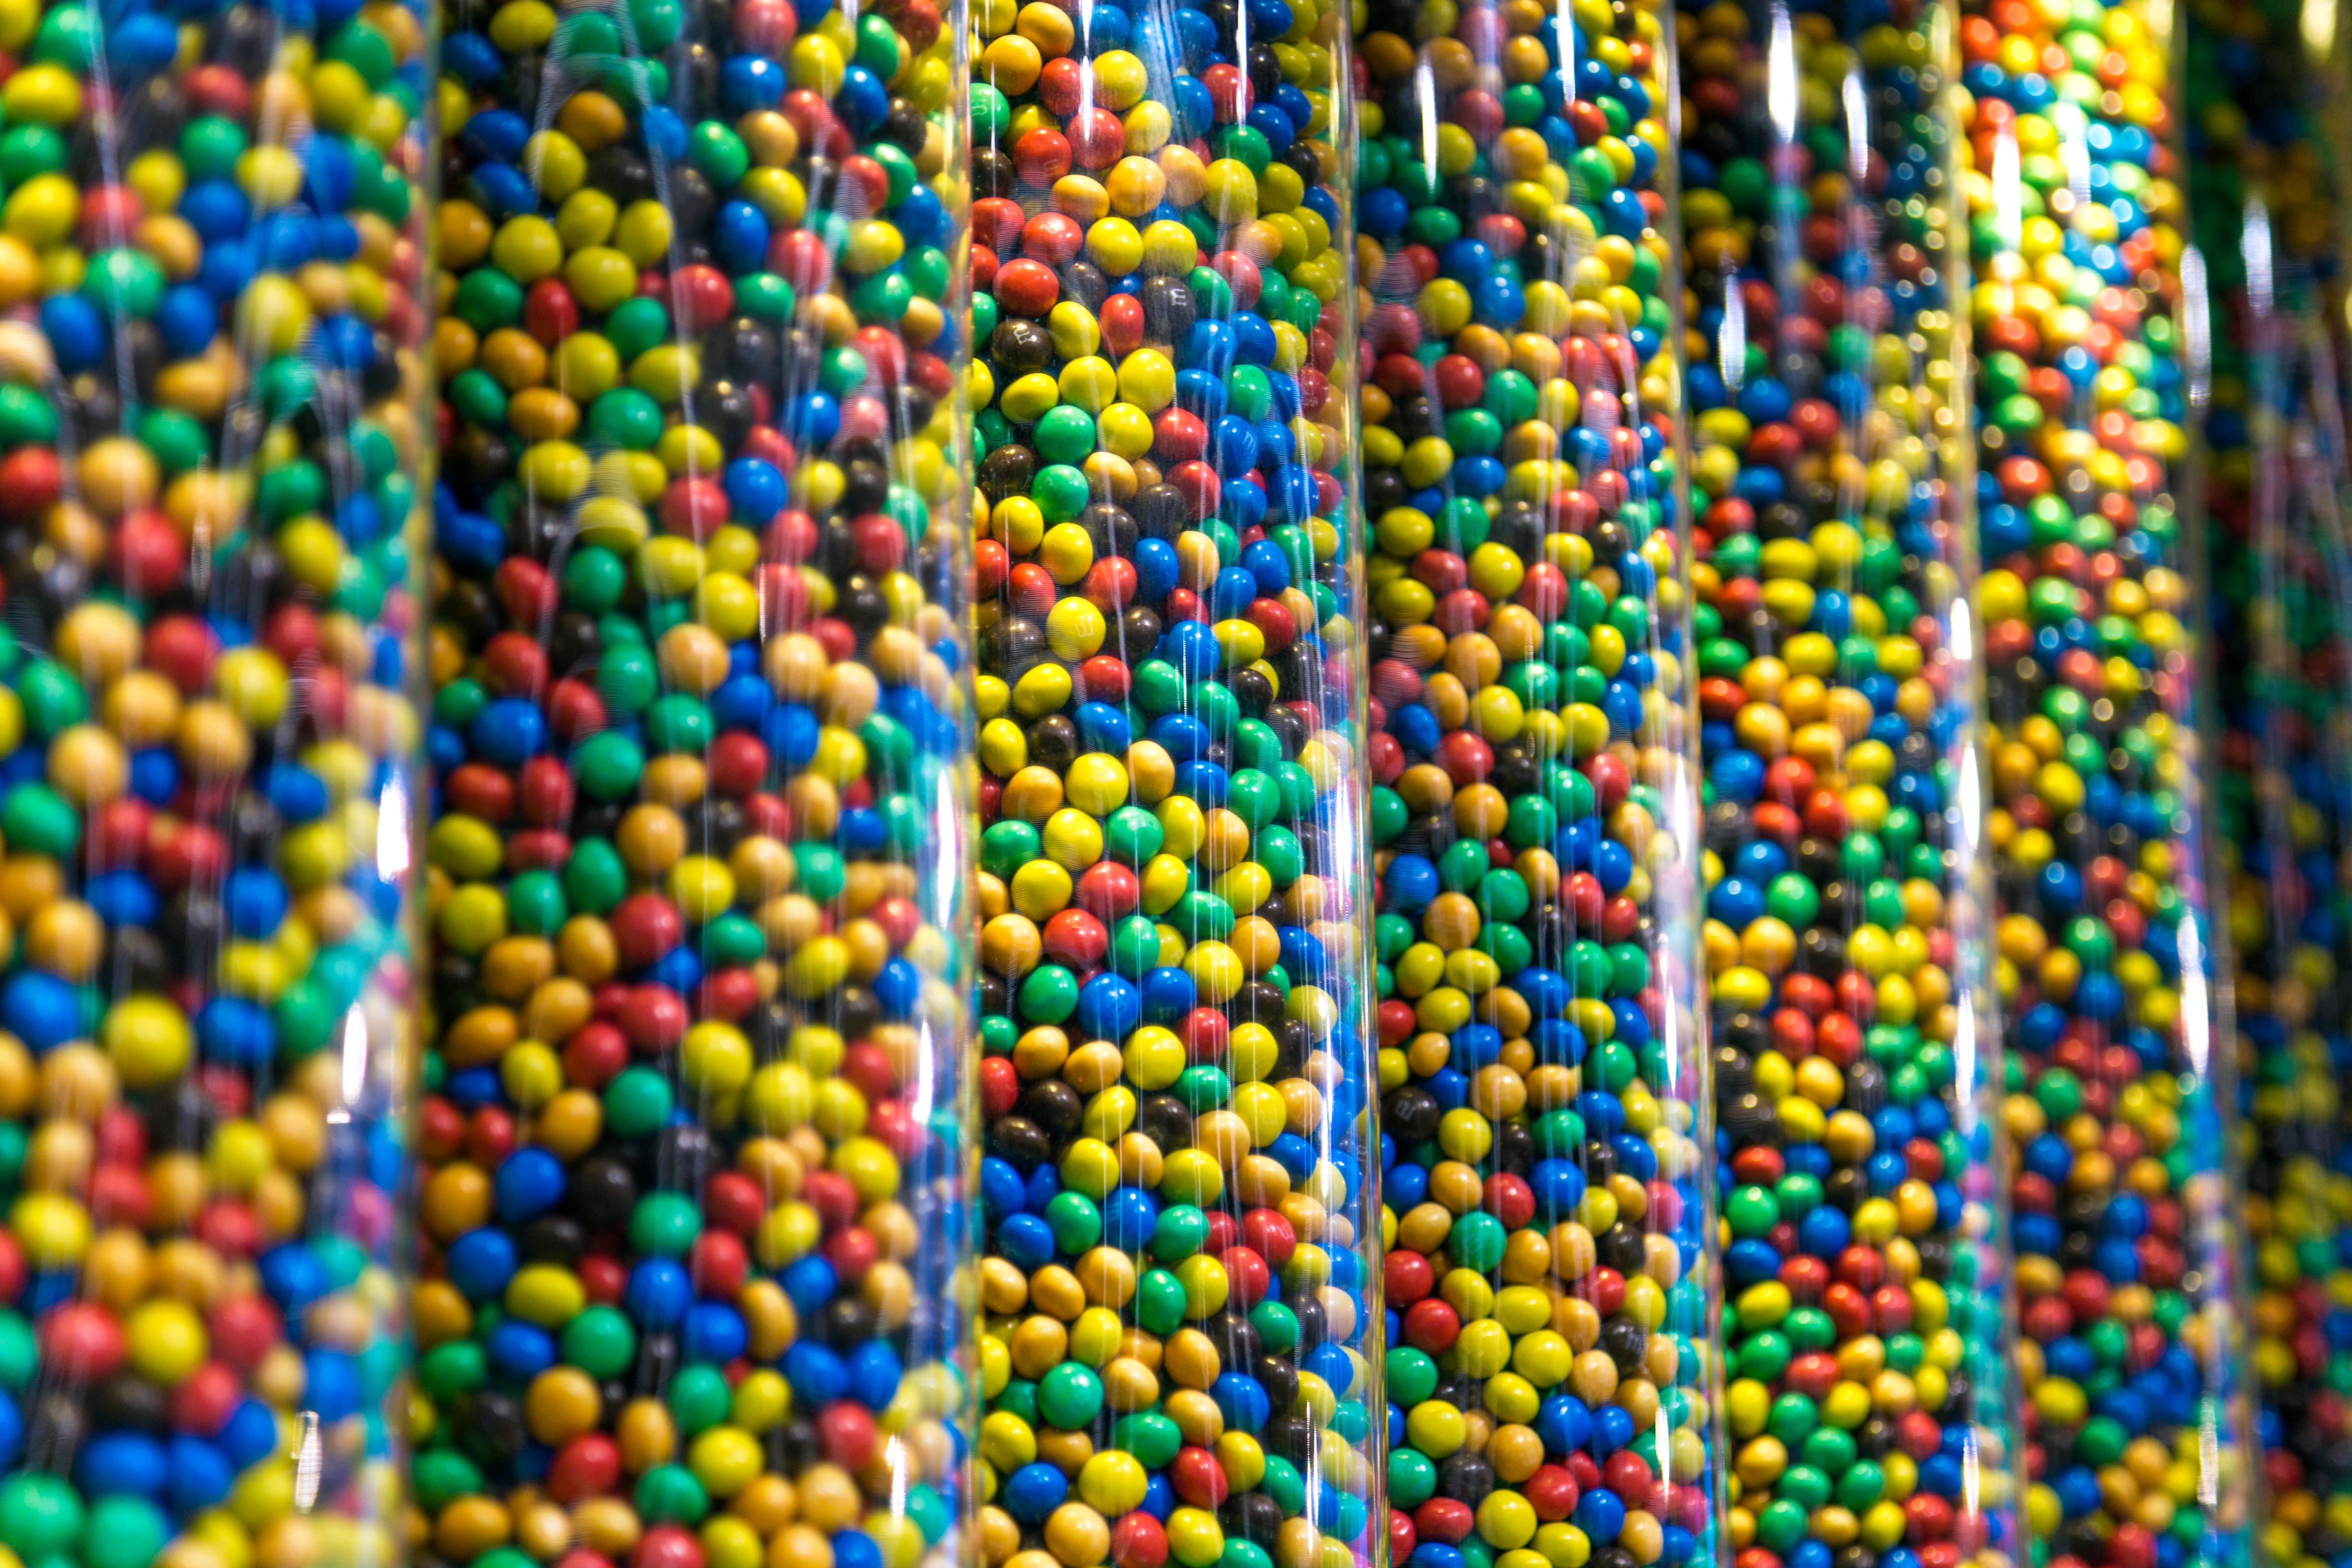 M&M's World's Biggest Candy Shop on Leicester's Square, London